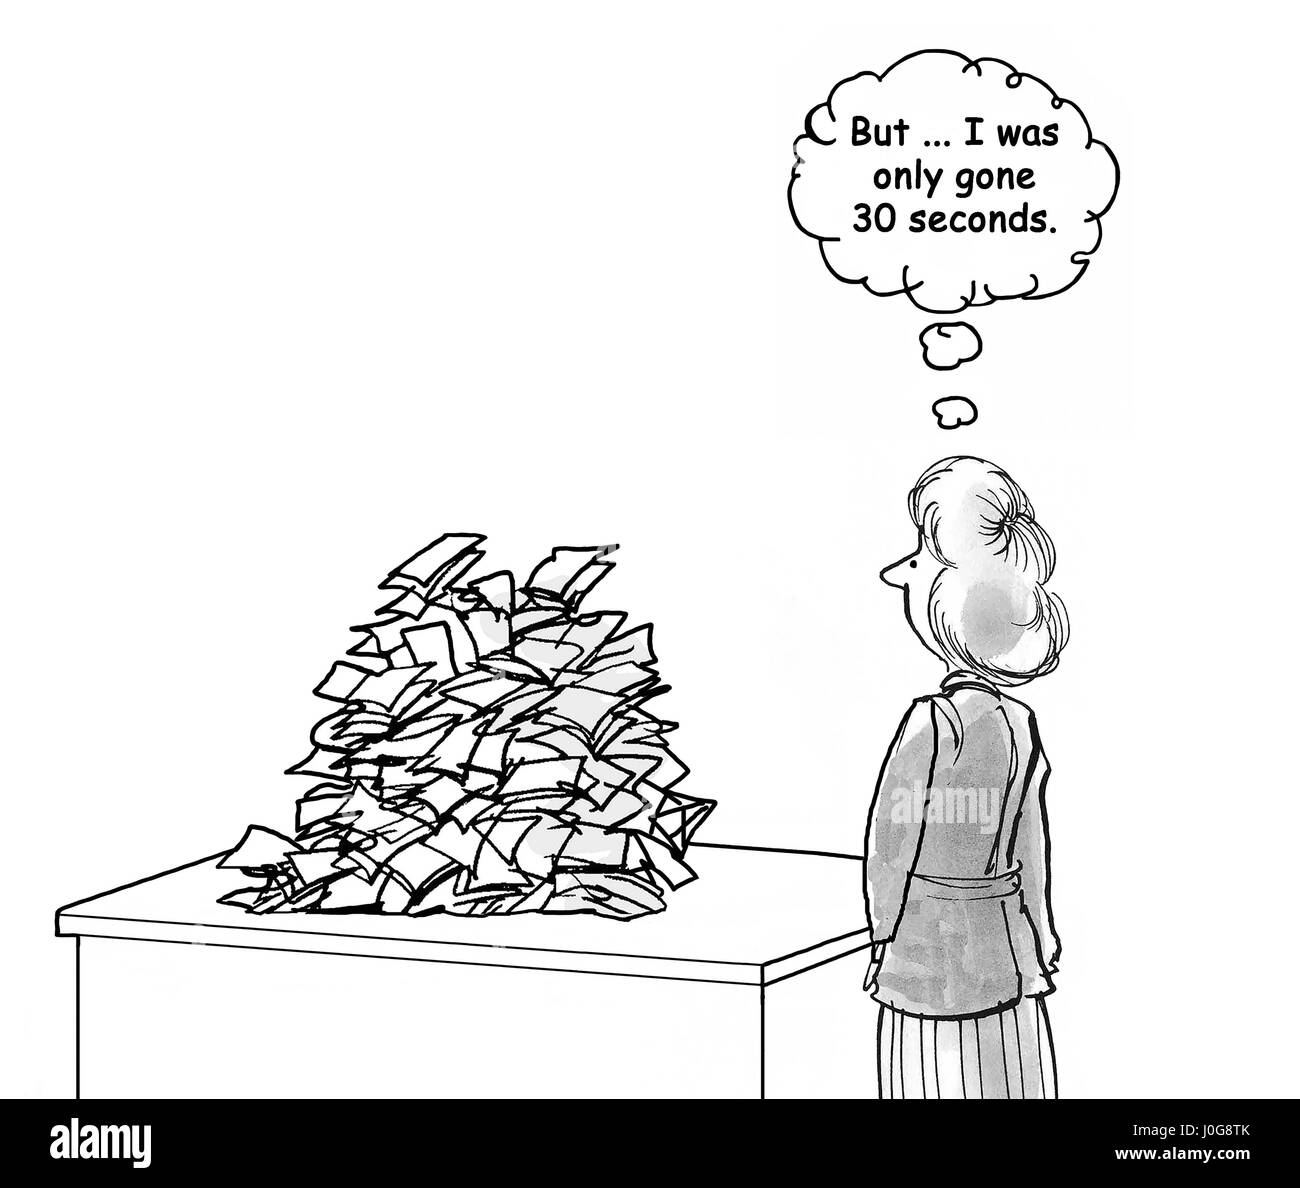 Business cartoon about never ending paperwork. Stock Photo